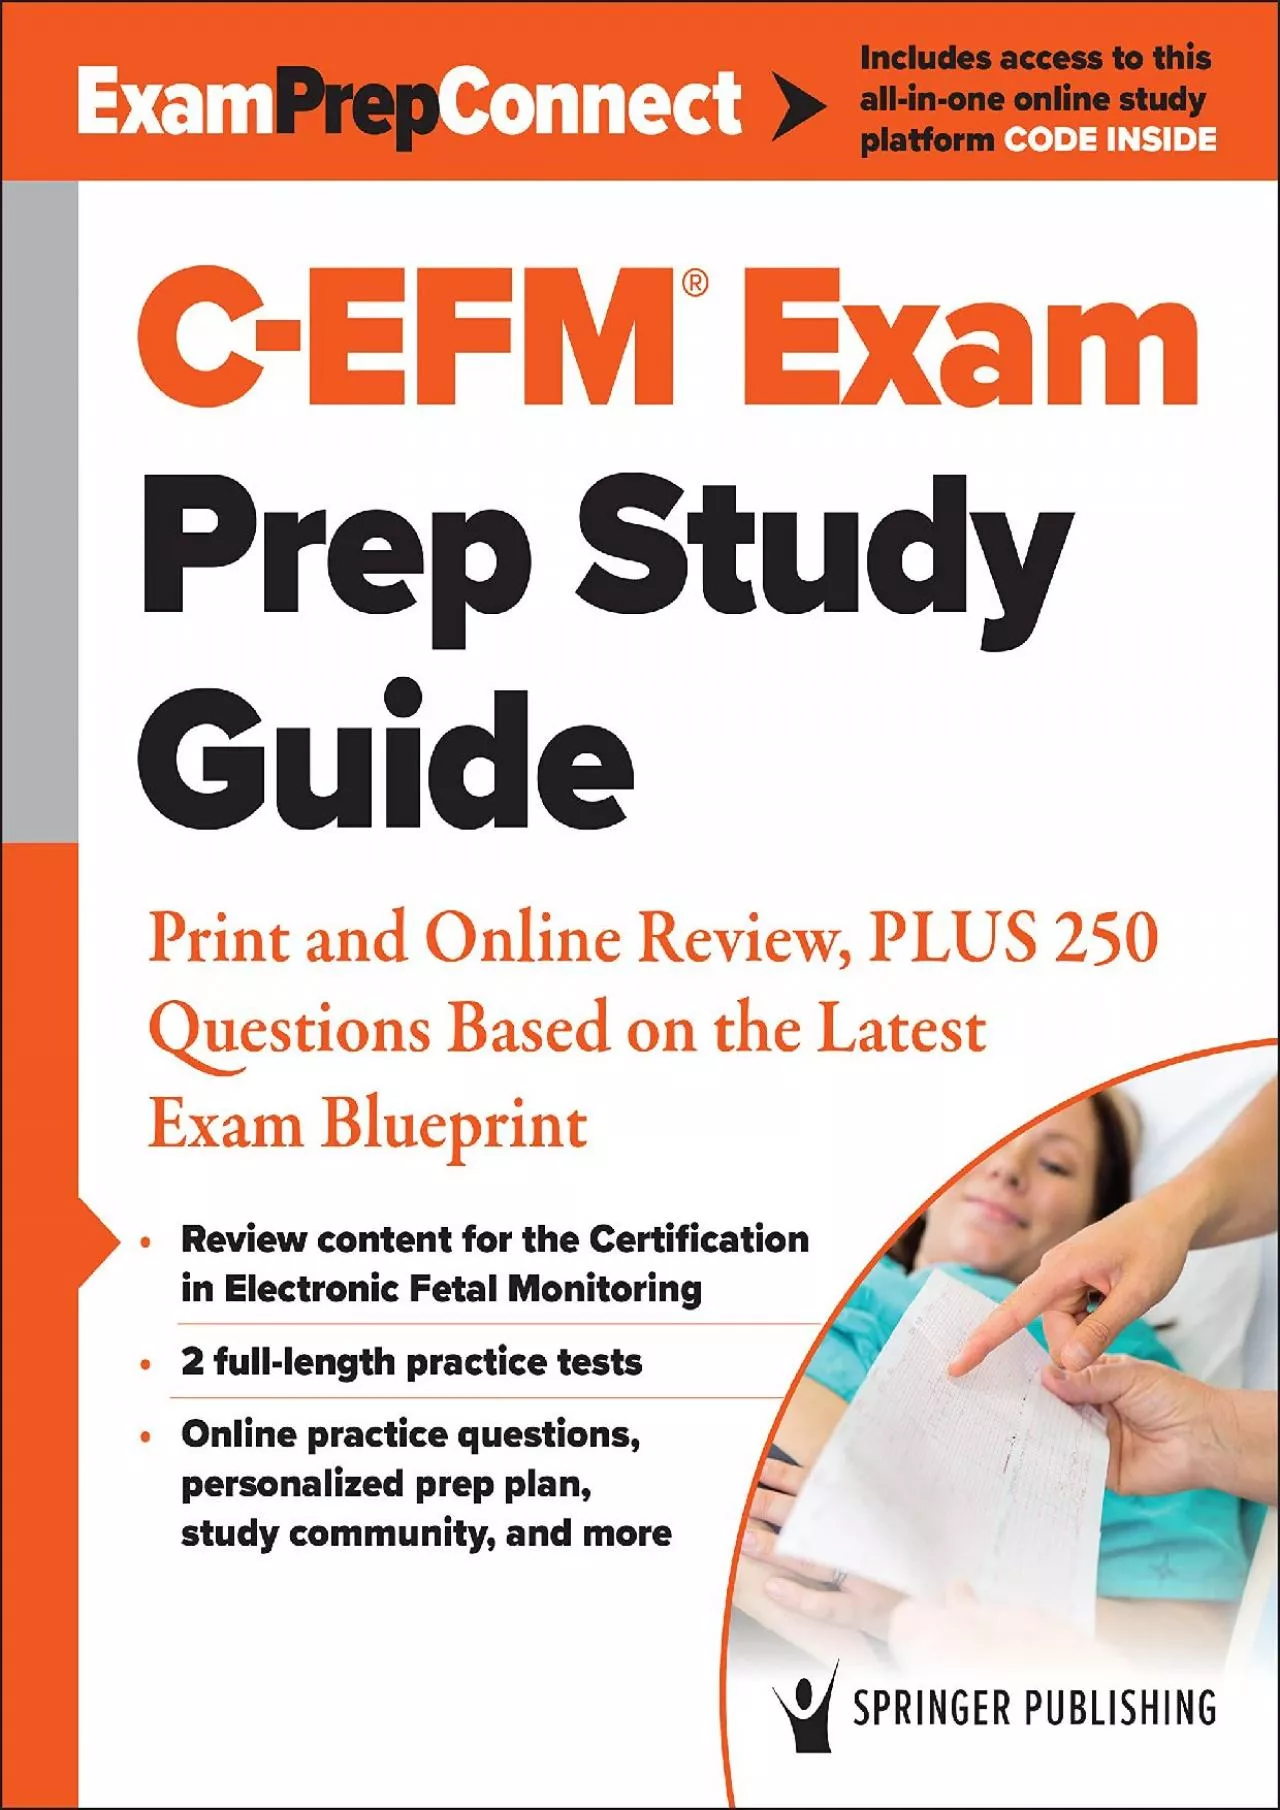 [READ] C-EFM® Exam Prep Study Guide: Print and Online Review, PLUS 250 Questions Based